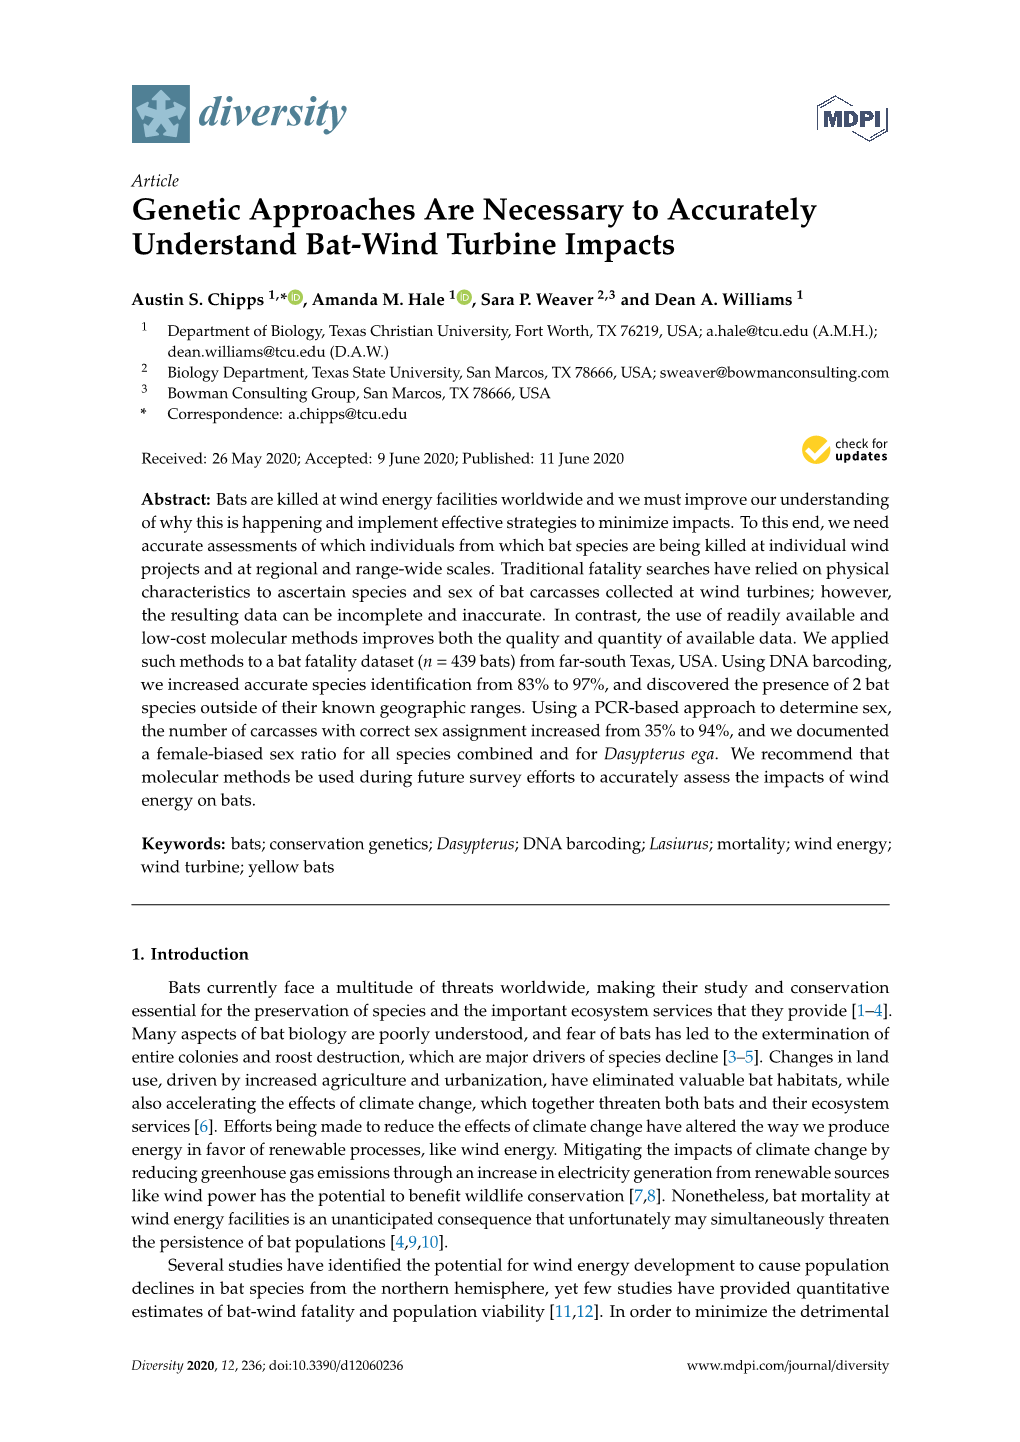 Genetic Approaches Are Necessary to Accurately Understand Bat-Wind Turbine Impacts